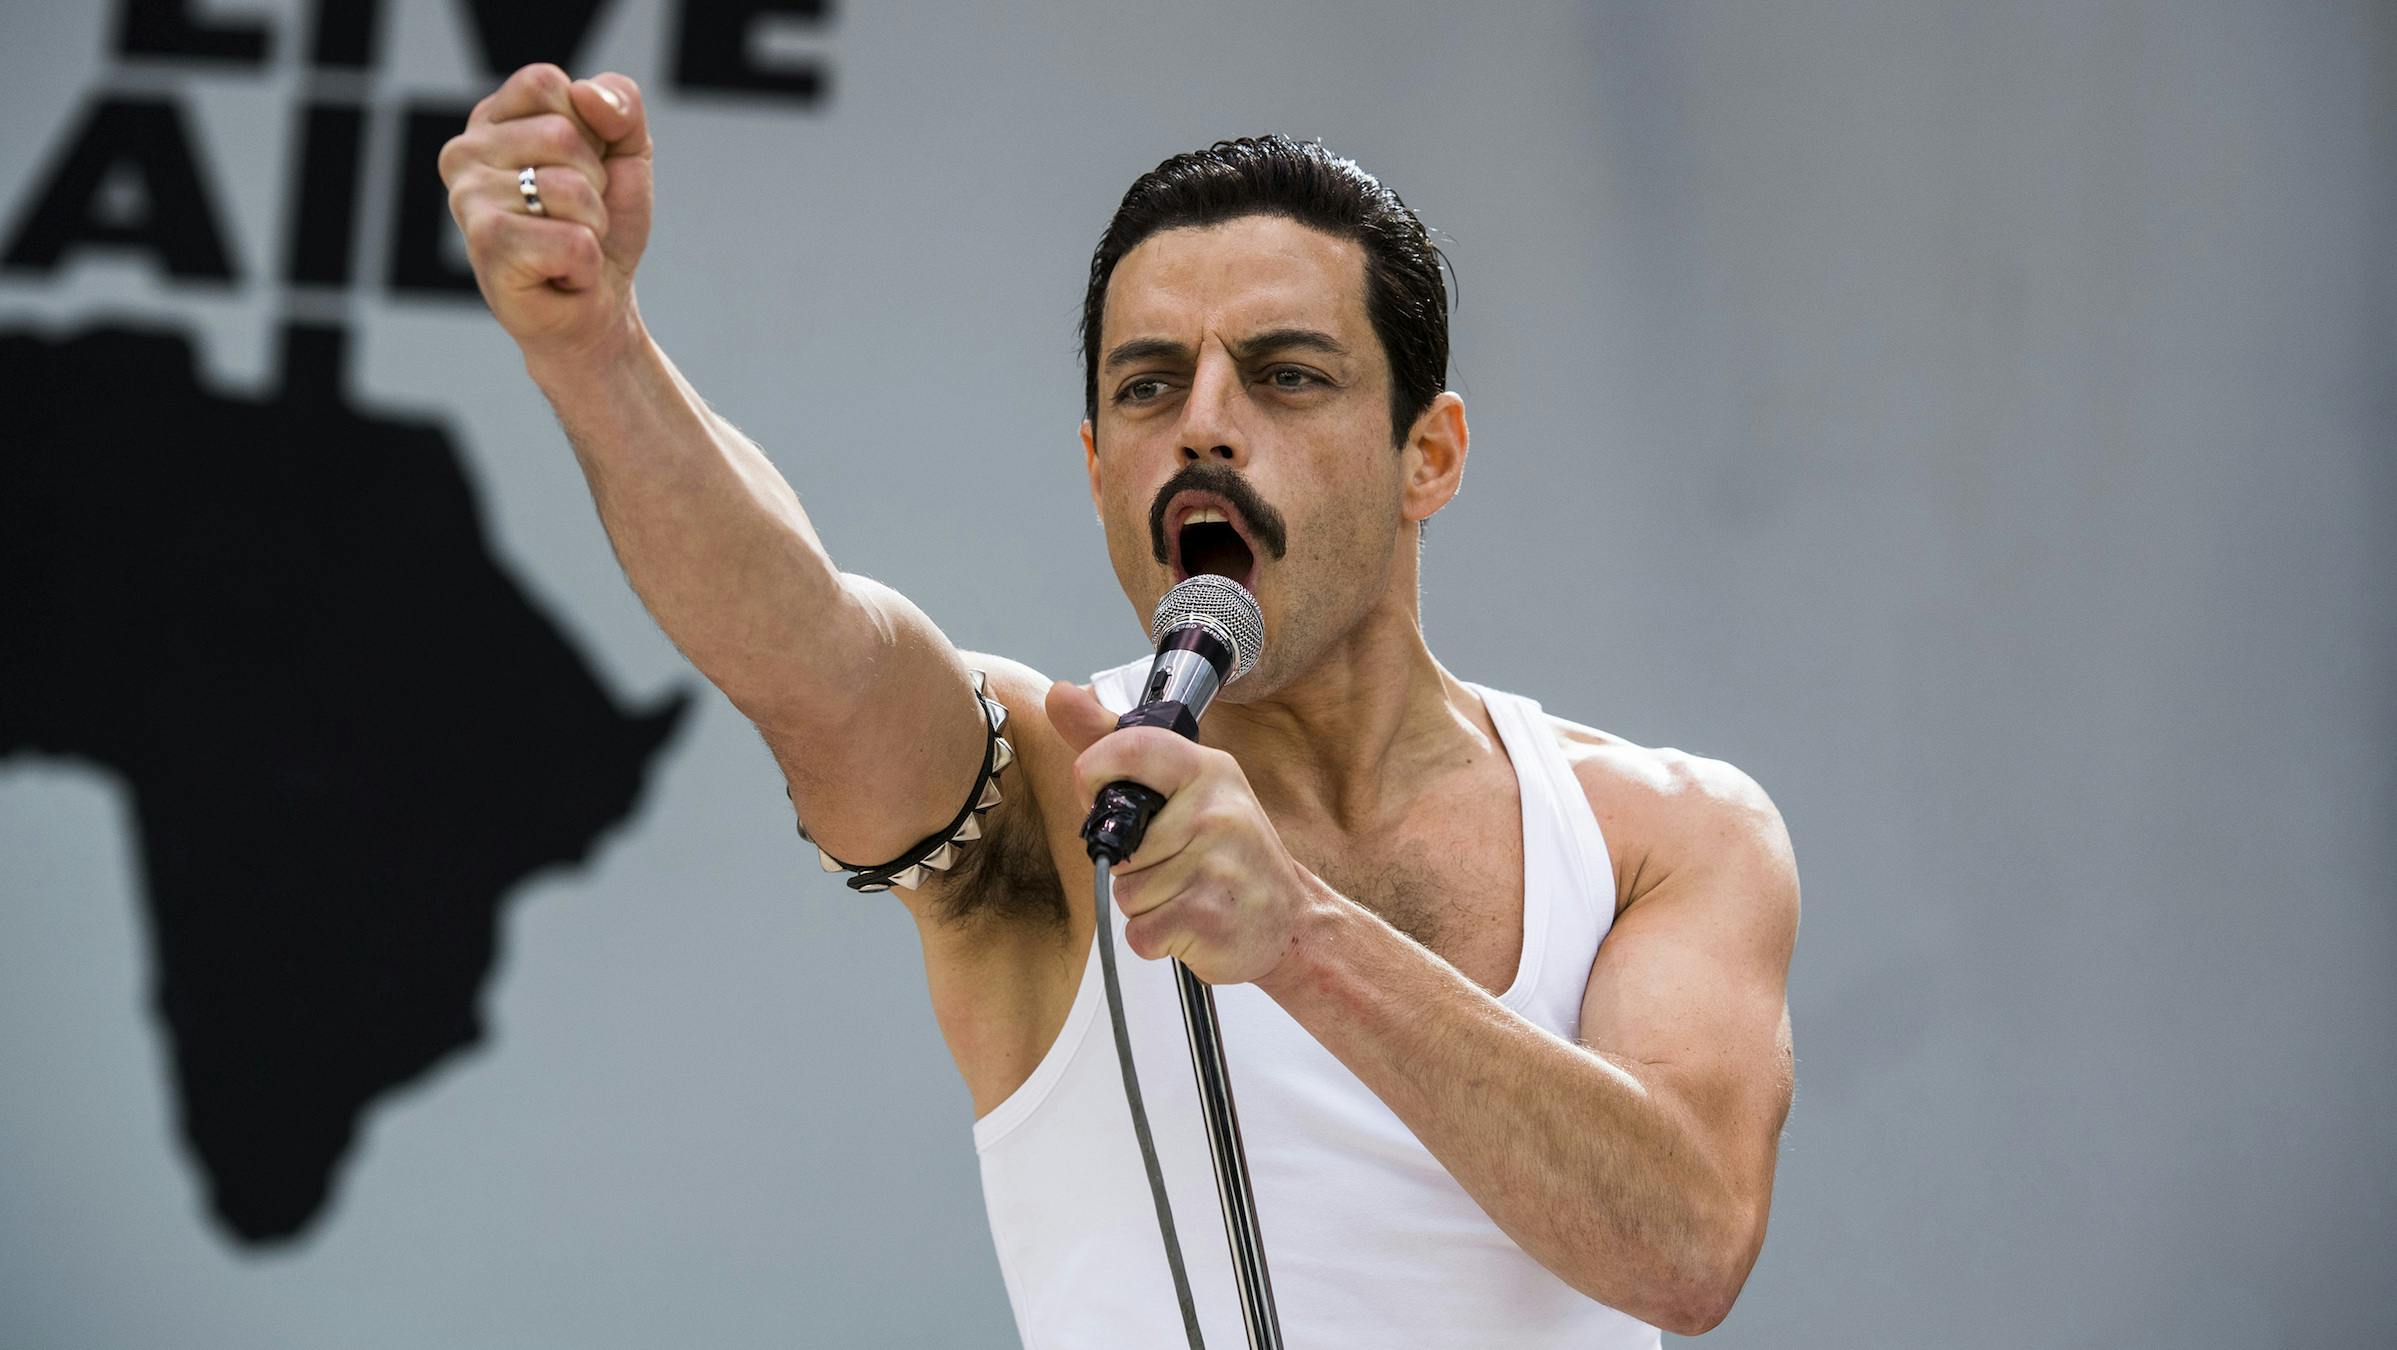 Bohemian Rhapsody Released In China With All References To Homosexuality Removed